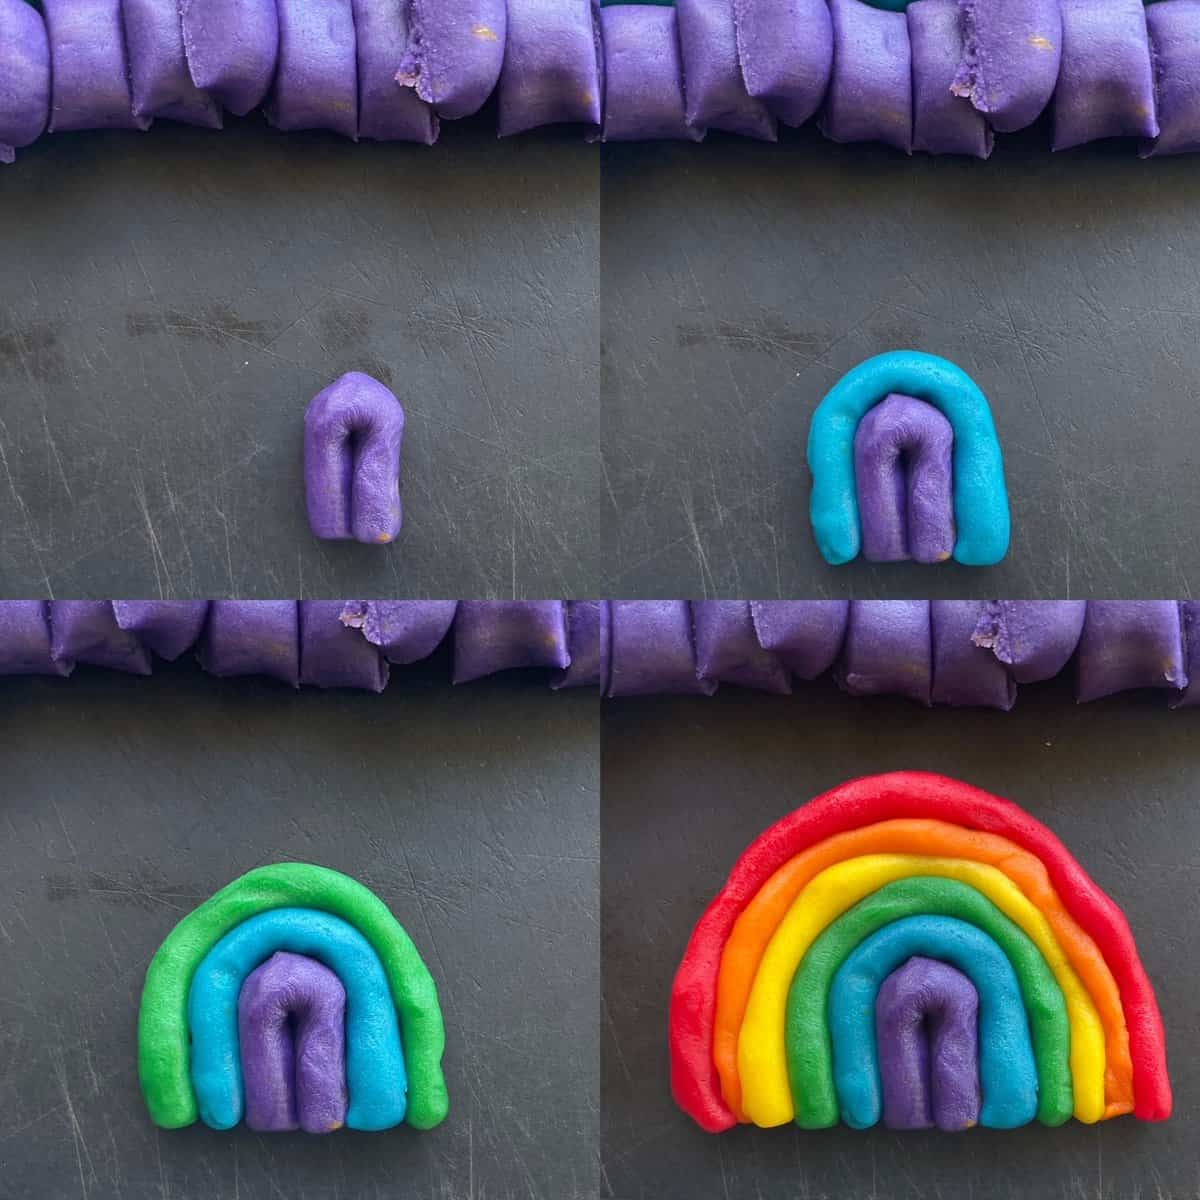 four panels showing shaping of the purple segment, the blue, the green, and then the final rainbow shaped cookie.